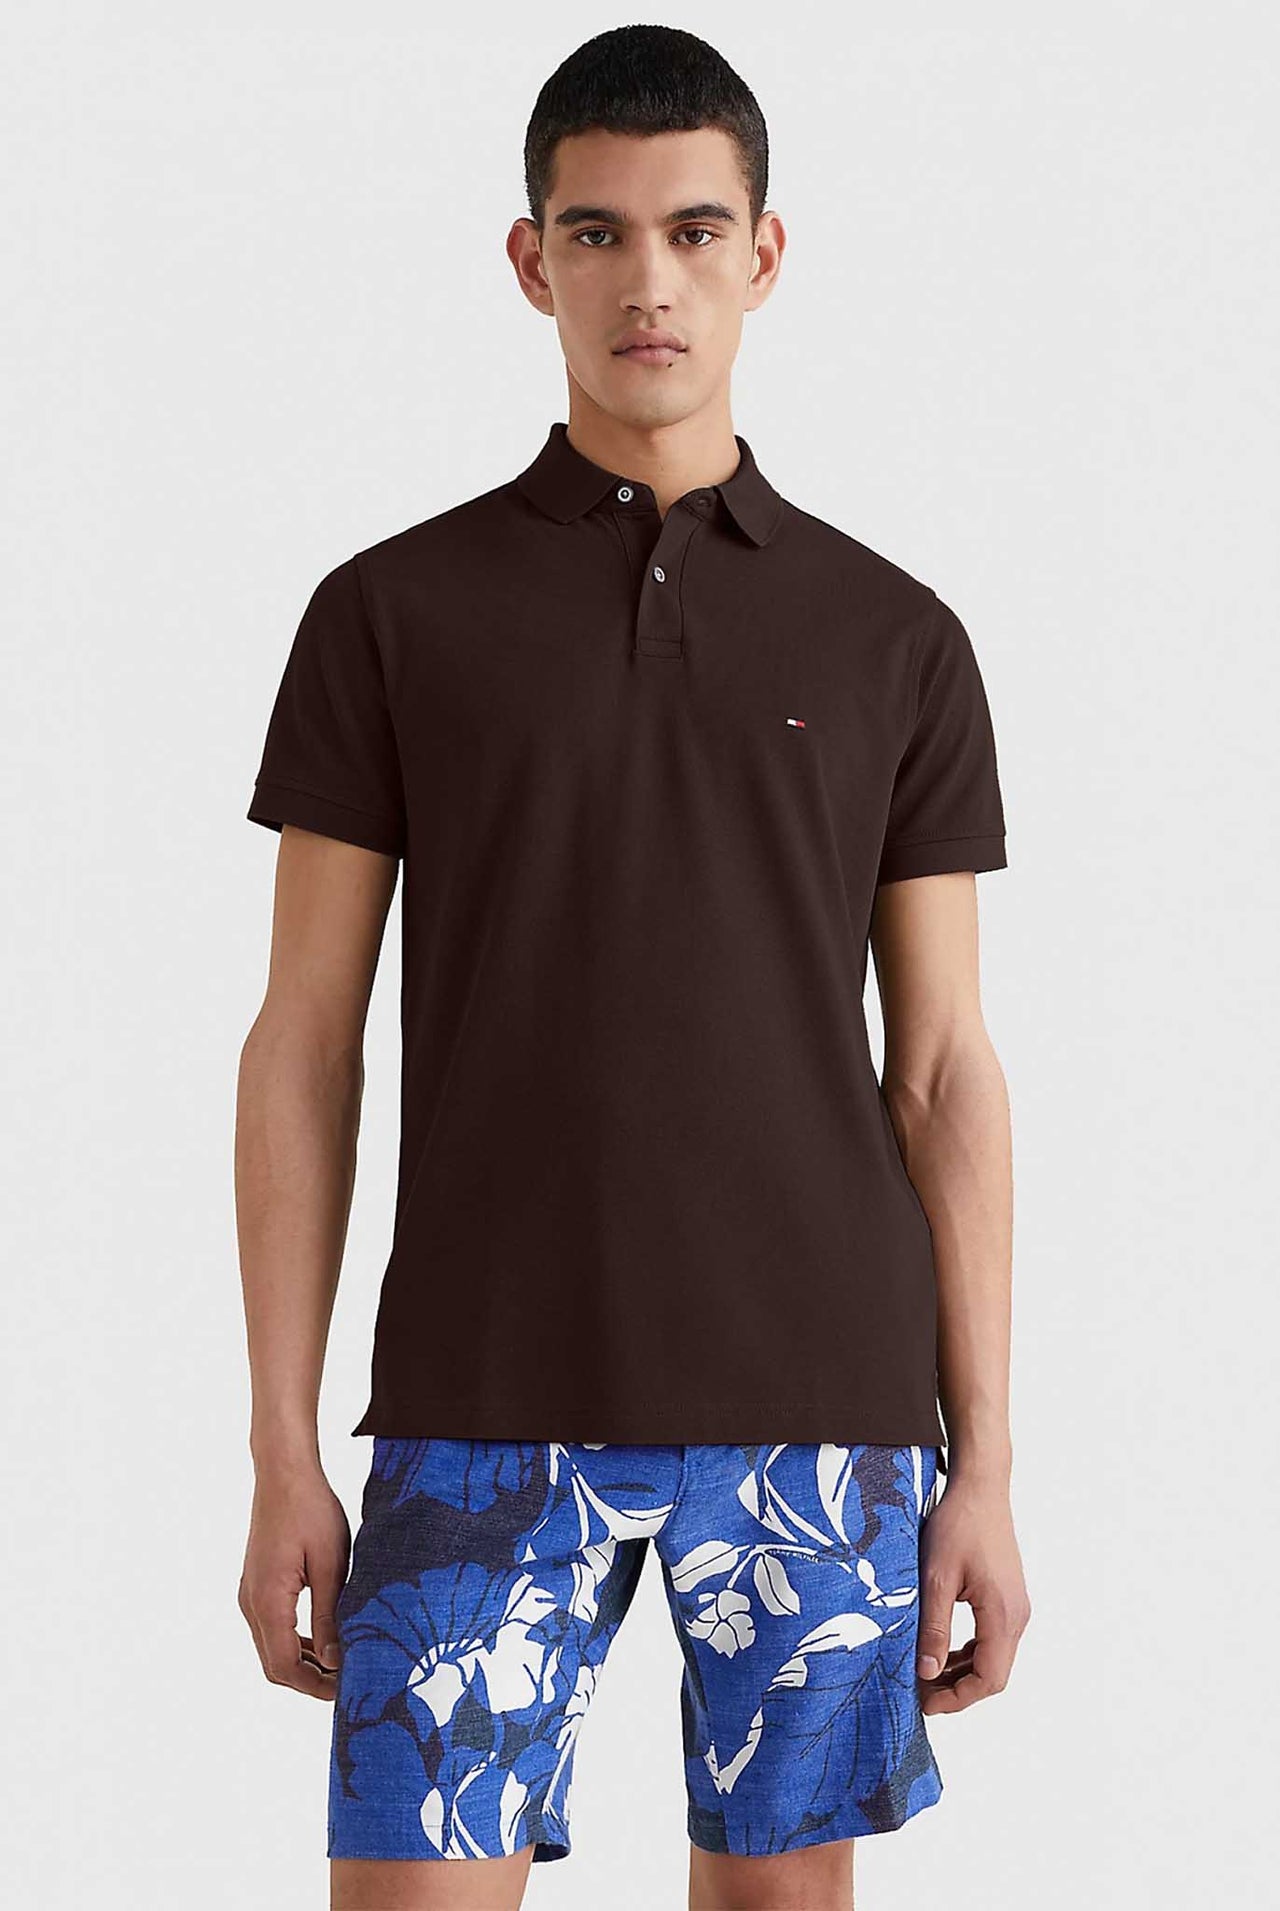 Polo Tommy Hilfiger Regular Fit 1985 Chocolate